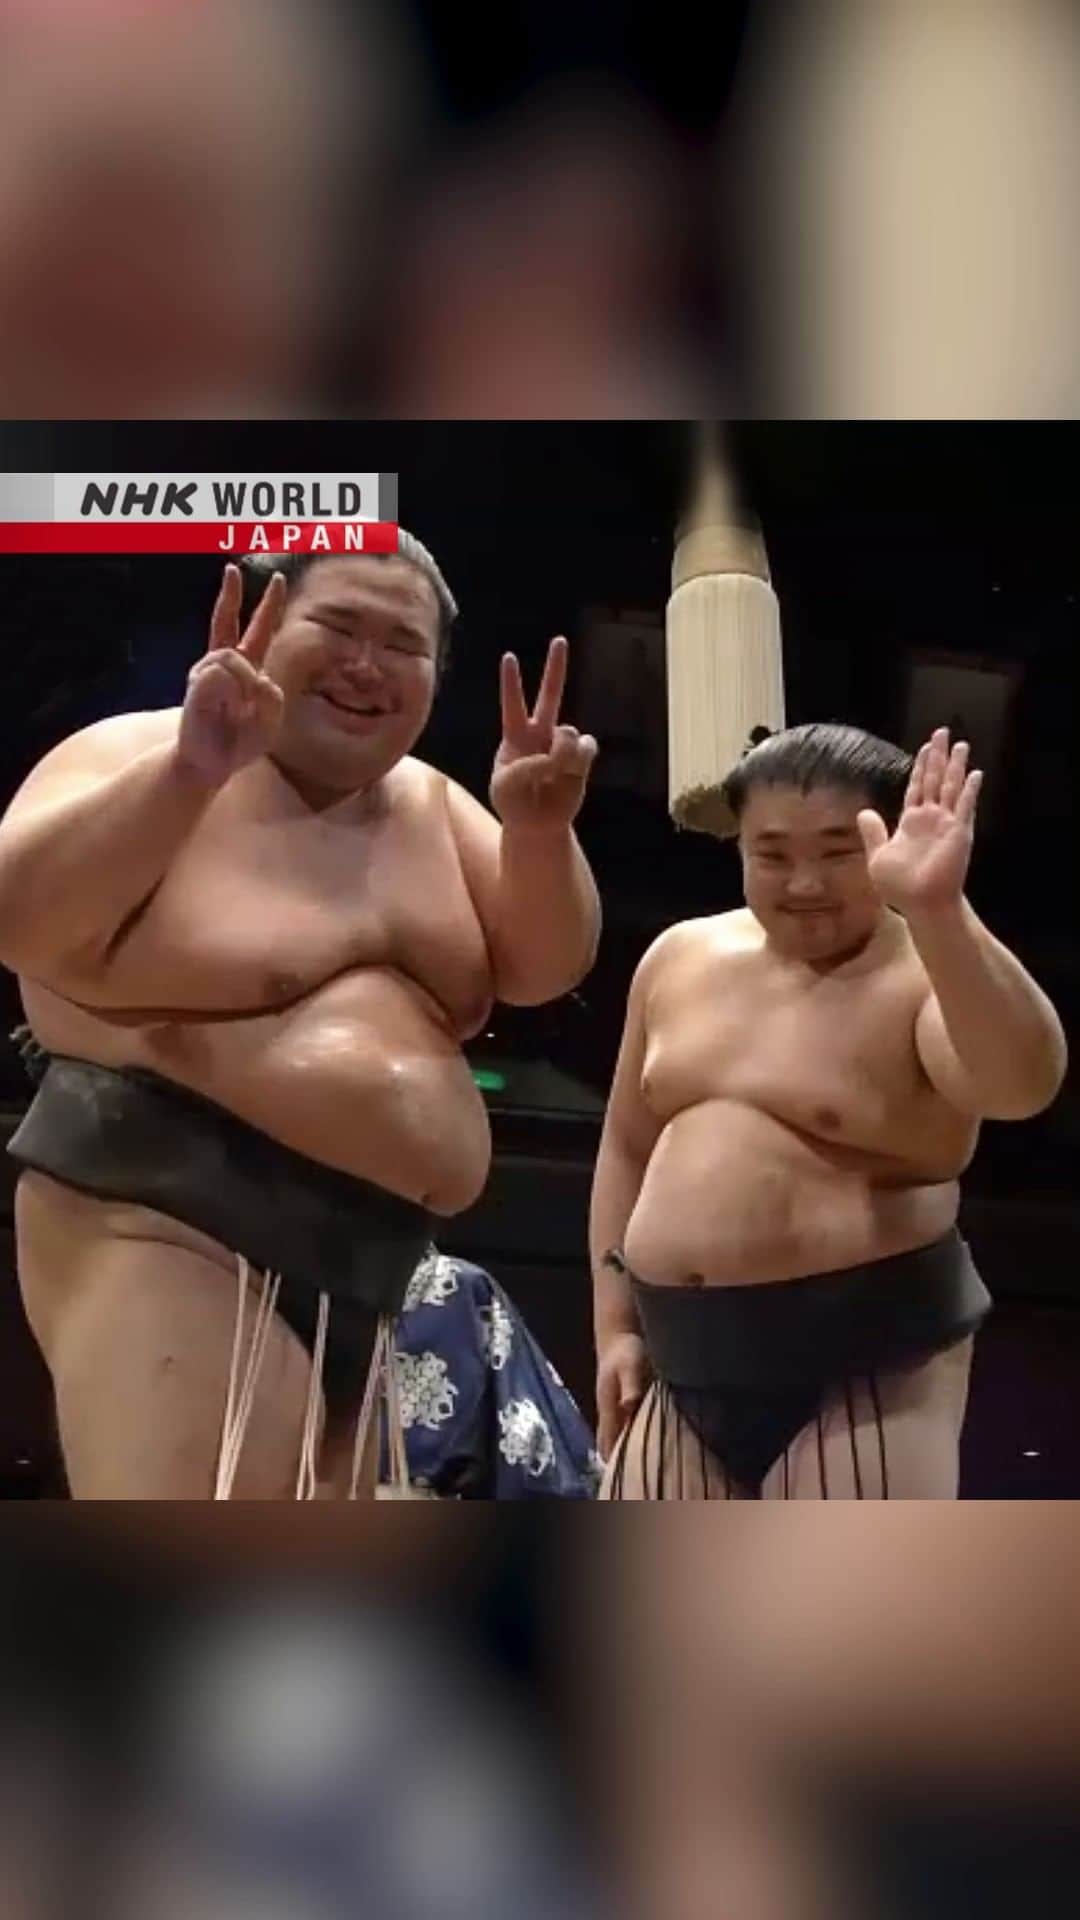 NHK「WORLD-JAPAN」のインスタグラム：「Have you been watching the sumo?🙋  The Fukuoka November Tournament began last weekend!💪  Here’s some moves you hopefully won’t see in the ring!😮  That top-knot pull looks painful!😧🫣  But it all seems in good fun?🙆‍♂️ . 👉See the full video and more cool sumo｜Watch｜Sumopedia: 30 - Kinjite (Forbidden Moves). . 👉Don’t miss the tournament action while it lasts｜Watch｜GRAND SUMO Highlights. . 👉All Free On Demand｜NHK WORLD-JAPAN website.👀 . 👉Tap in Stories/Highlights to get there.👆 . 👉Follow the link in our bio for more on the latest from Japan. . 👉If we’re on your Favorites list you won’t miss a post. . . #sumo #相撲 #kinjite #sumowrestler #japanesesumo #sumotournament #rikishi #sumowrestling #japantradition #japanculture #visitjapan #discoverjapan #sumopedia #grandsumohighlights #nhkworldjapan #japan」